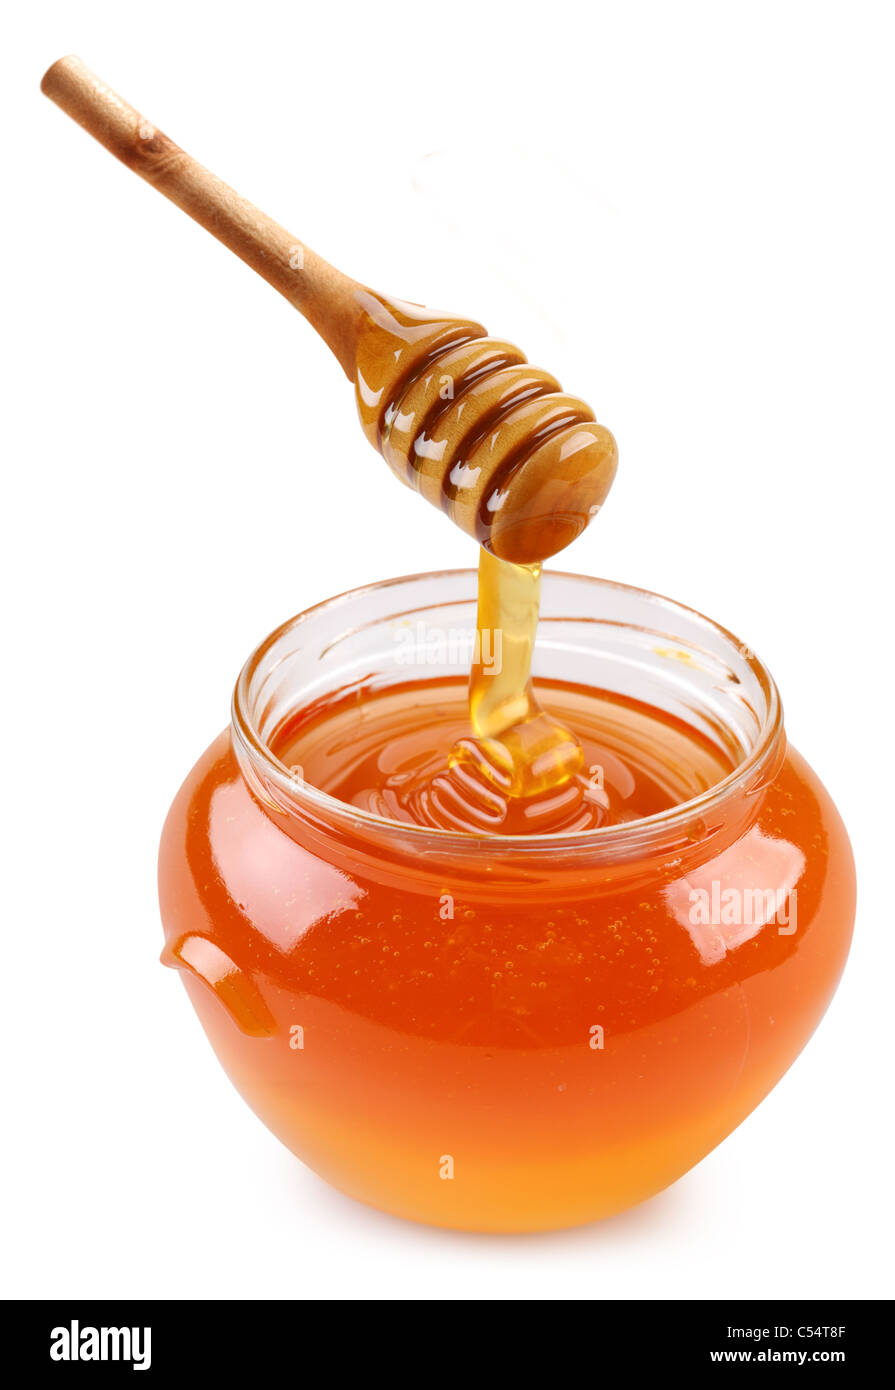 Pot of honey and wooden stick. Isolated on a white background. Stock Photo